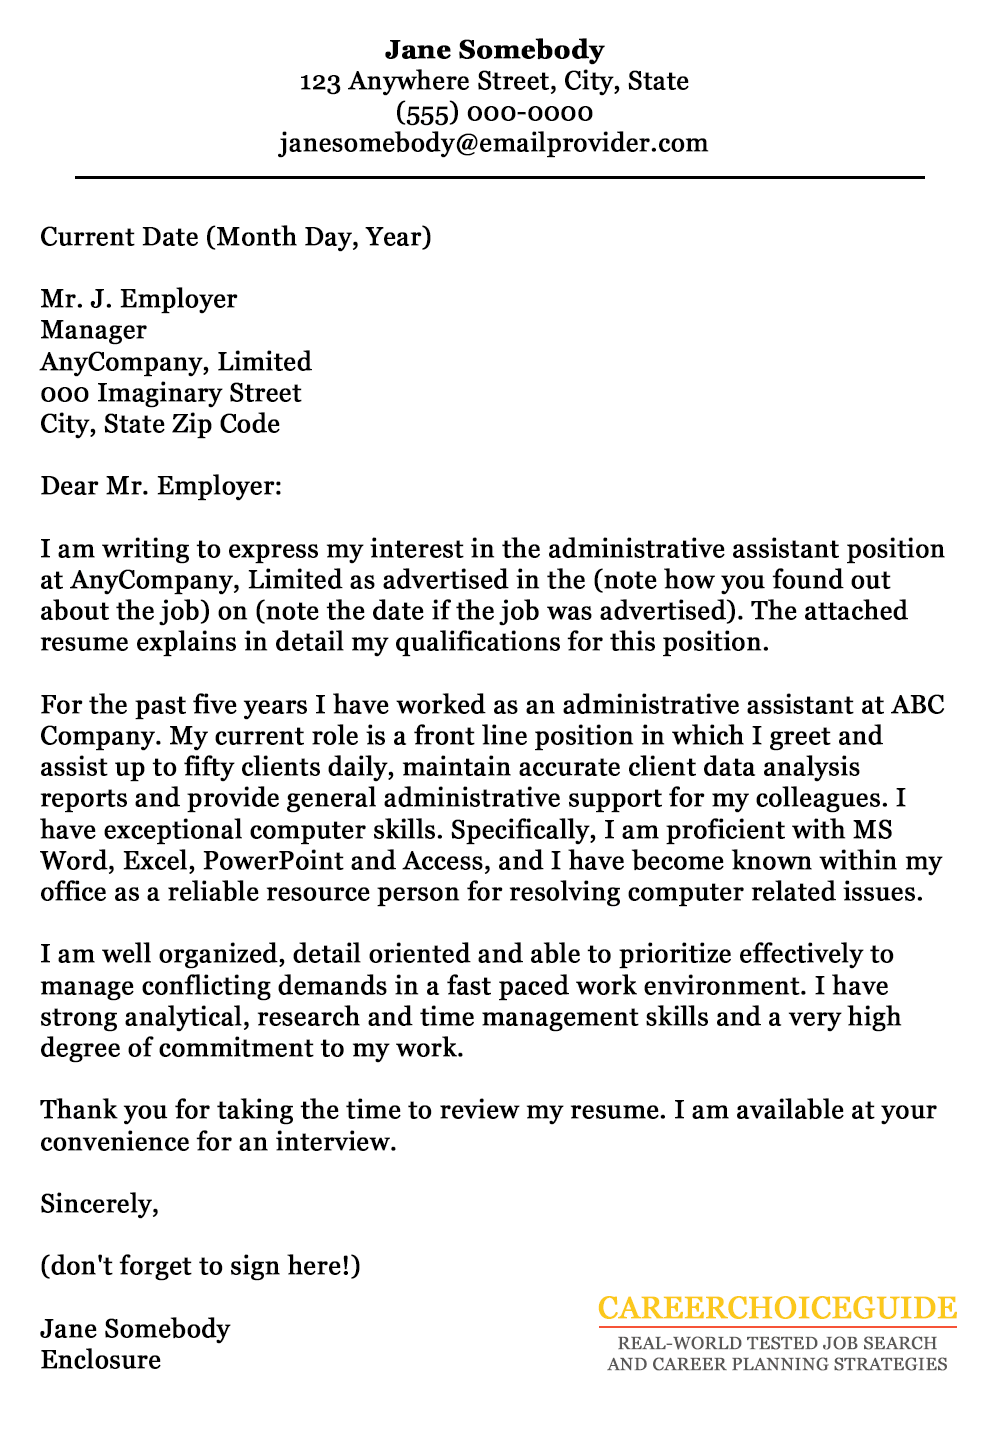 Cover Letter For Admin Job from www.careerchoiceguide.com